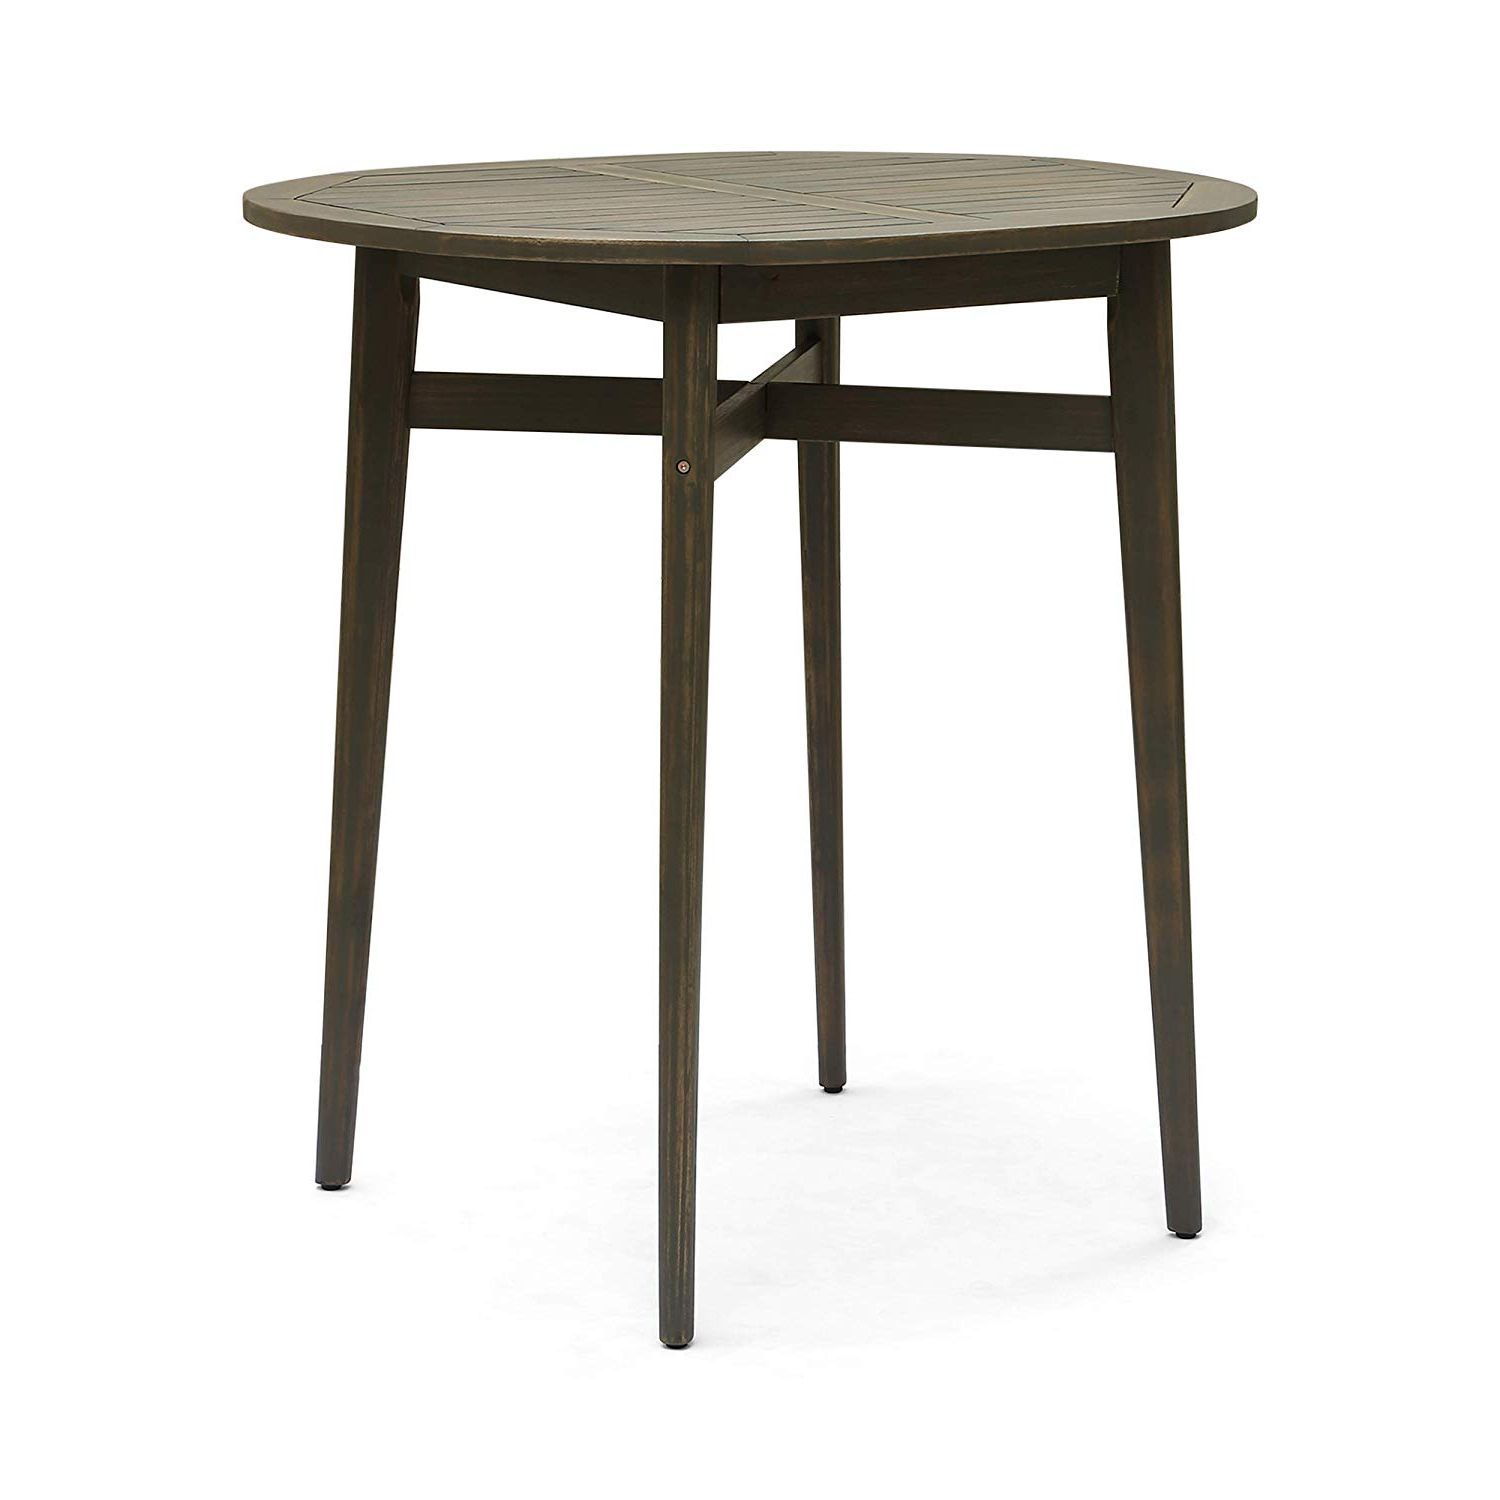 Acacia Dining Tables With Black Victor Legs Intended For Most Recently Released Great Deal Furniture Stanford Bar Height Patio Table (View 17 of 30)